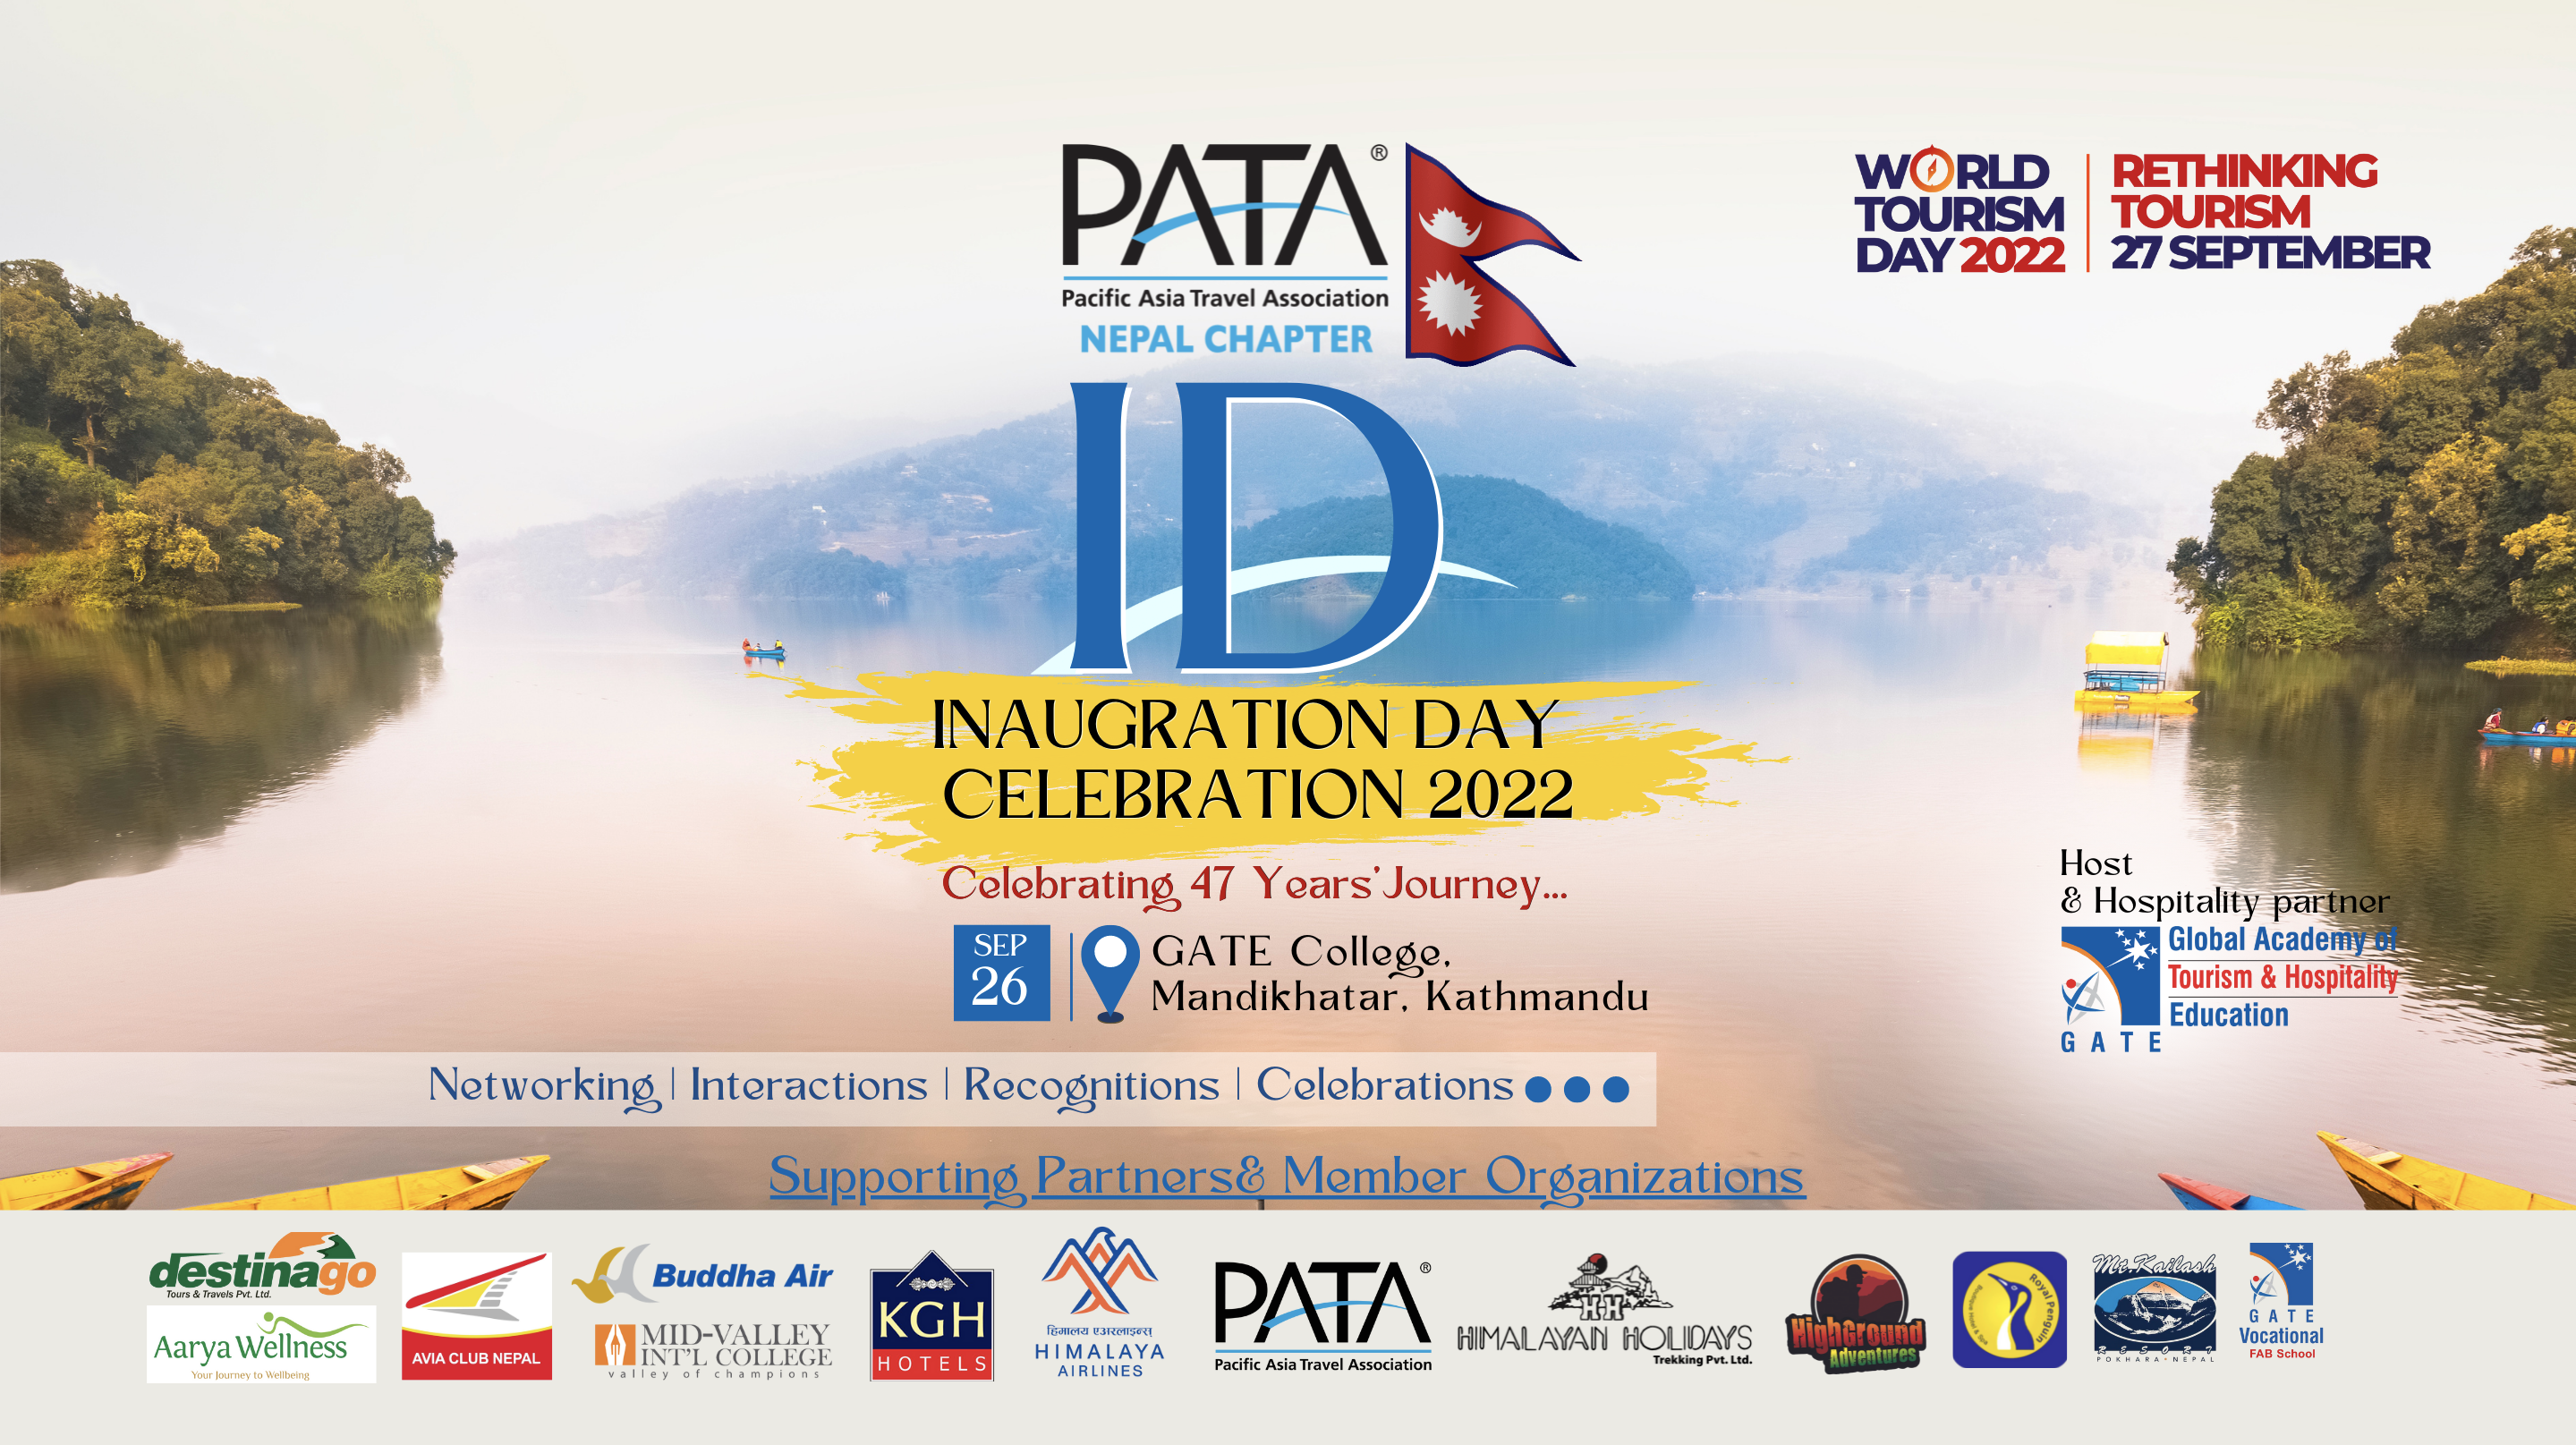 PATA Nepal Chapter organized a noble event titled “PATA ID”, in celebration of its 47 Years' Journey